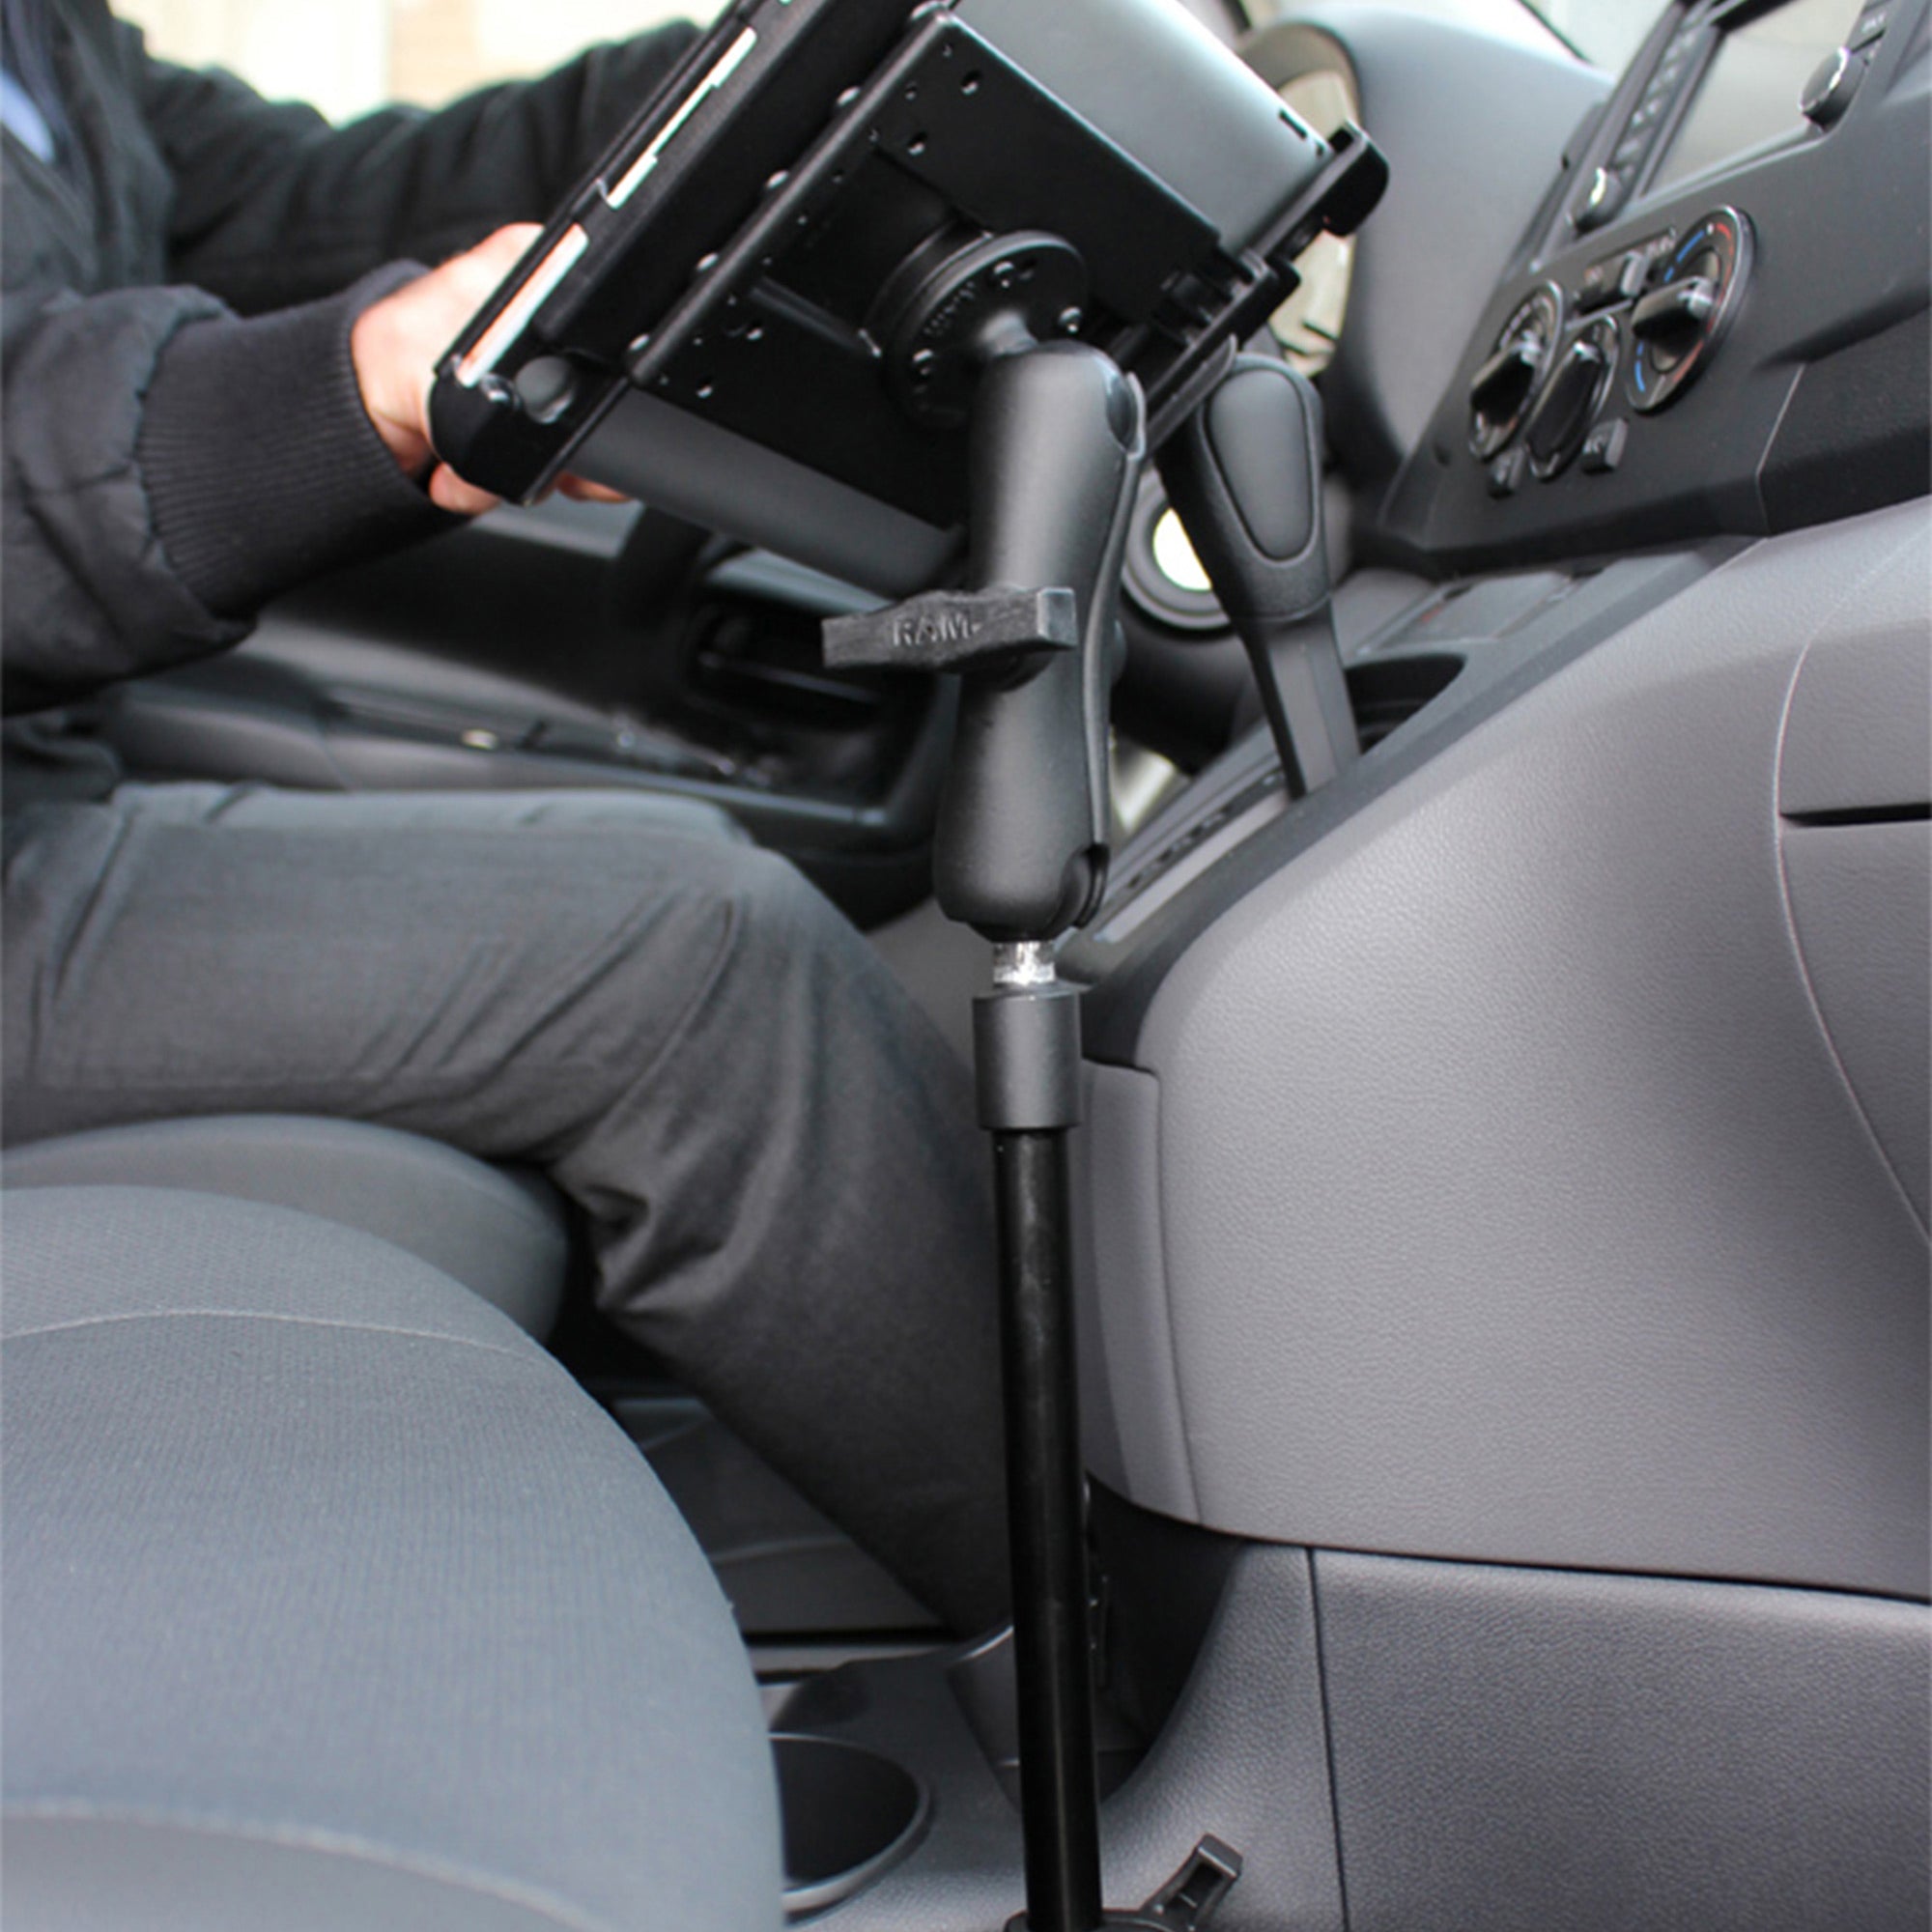 RAM Pod HD Vehicle Mount with 12" Aluminum Rod and C-Size Round Plate